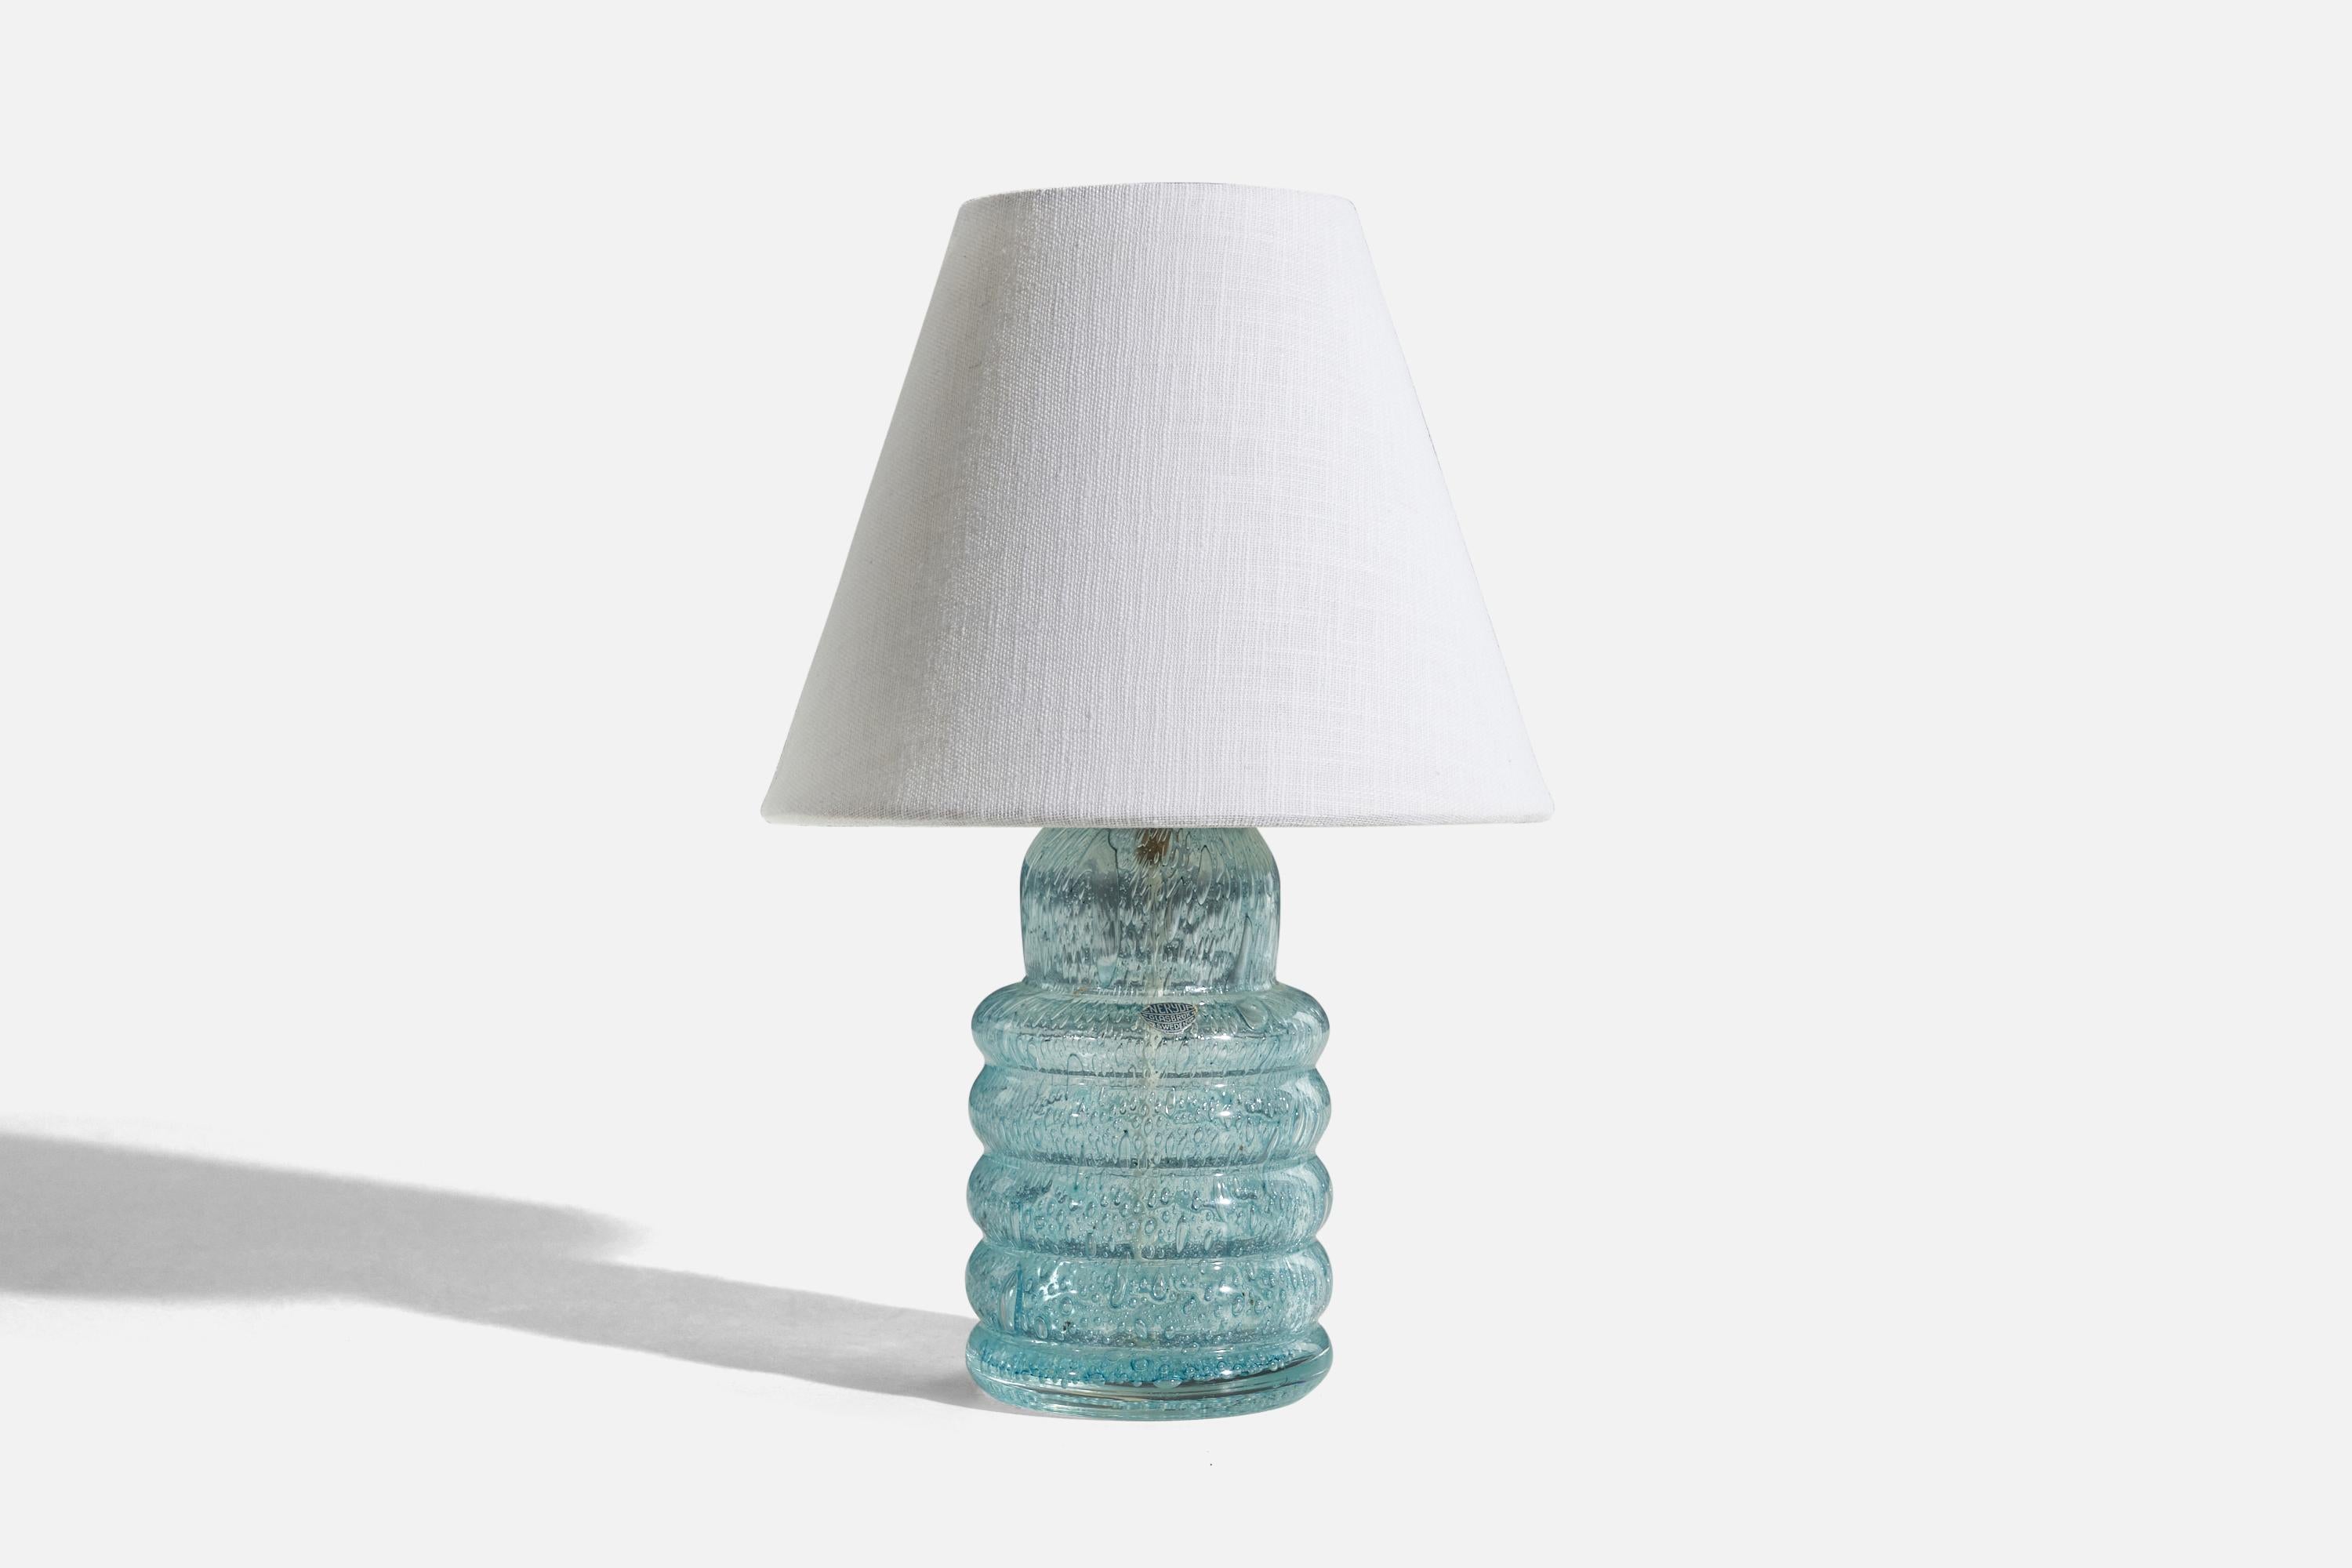 A glass table lamp designed and produced in Sweden, c. 1960s. 

Sold without lampshade. 
Dimensions of Lamp (inches) : 9.93 x 3.87 x 3.87 (H x W x D)
Dimensions of Shade (inches) : 4 x 8 x 6.5 (T x B x S)
Dimension of Lamp with Shade (inches) :